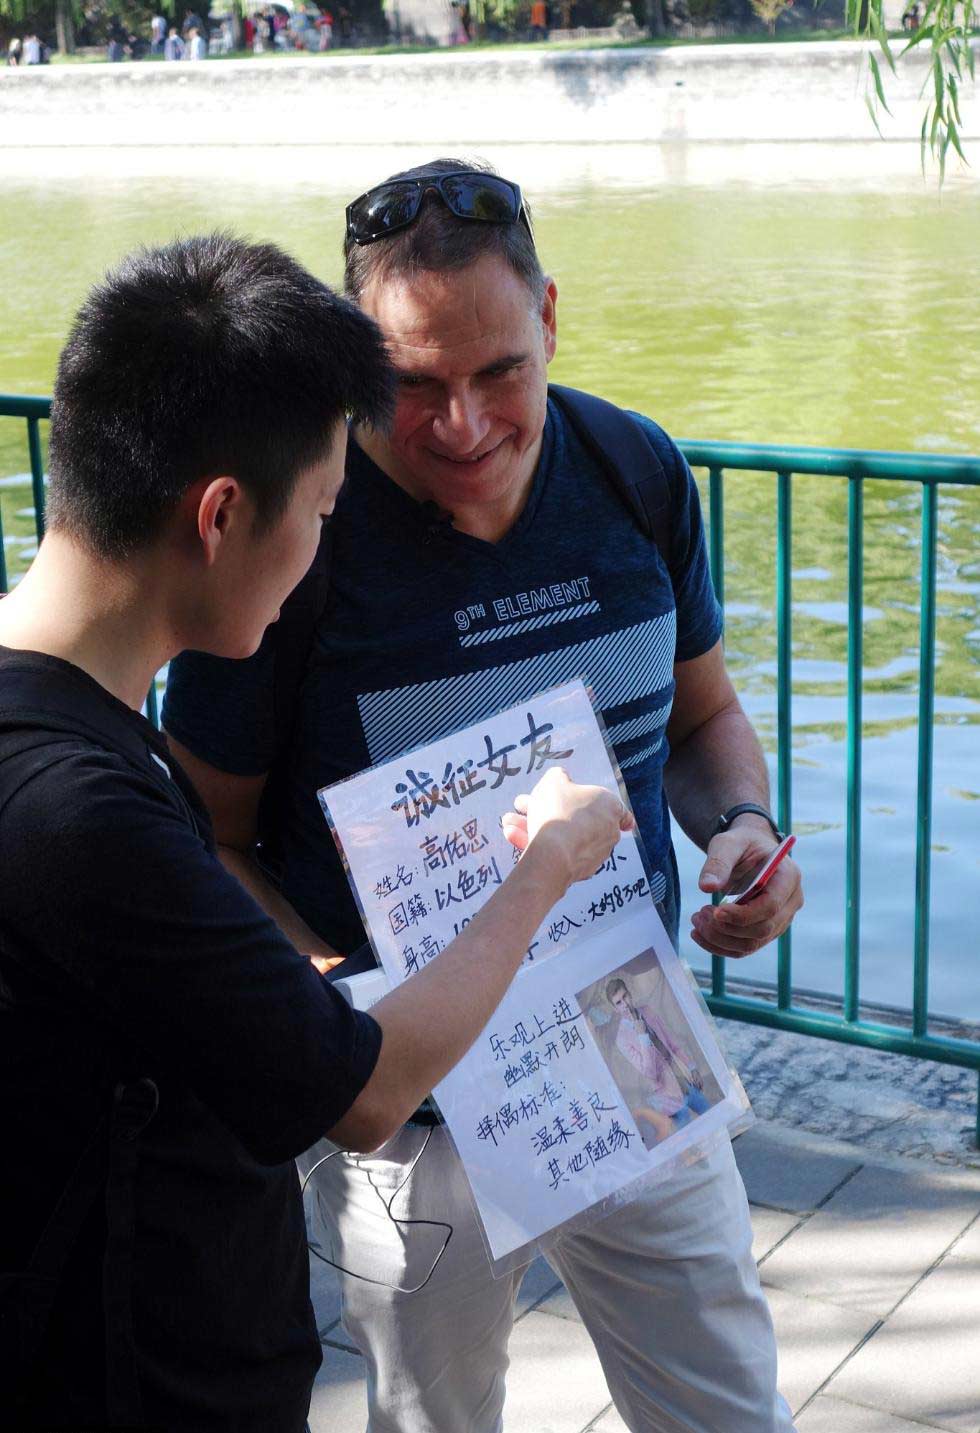 Israeli man seeks Chinese girlfriend for his son as marriage partner